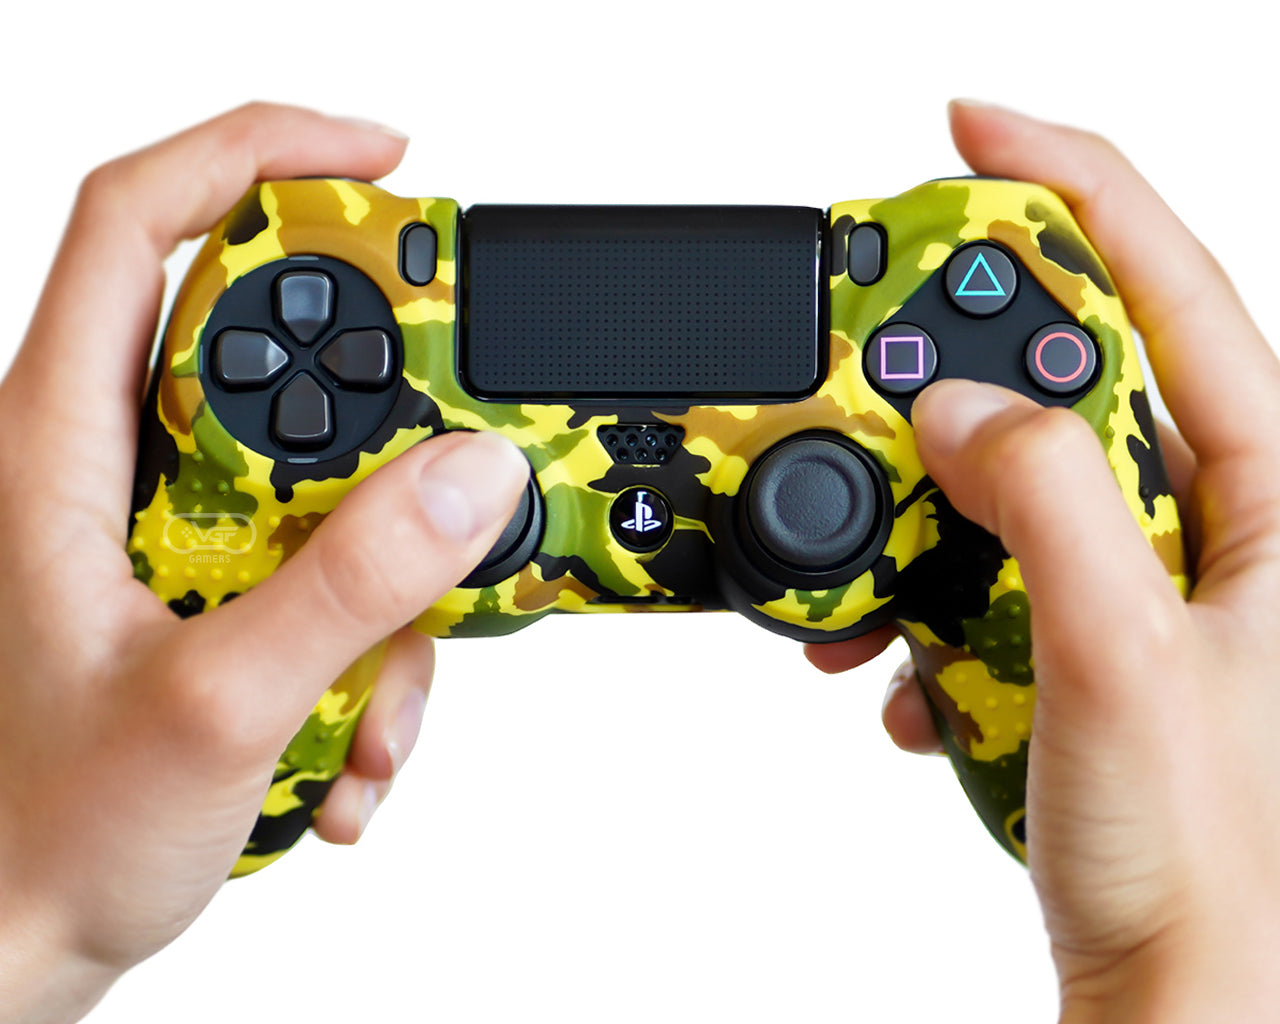 Desert Camo By Proflex Ps4 Silicone Controller Skin Cover Vgf Gamers